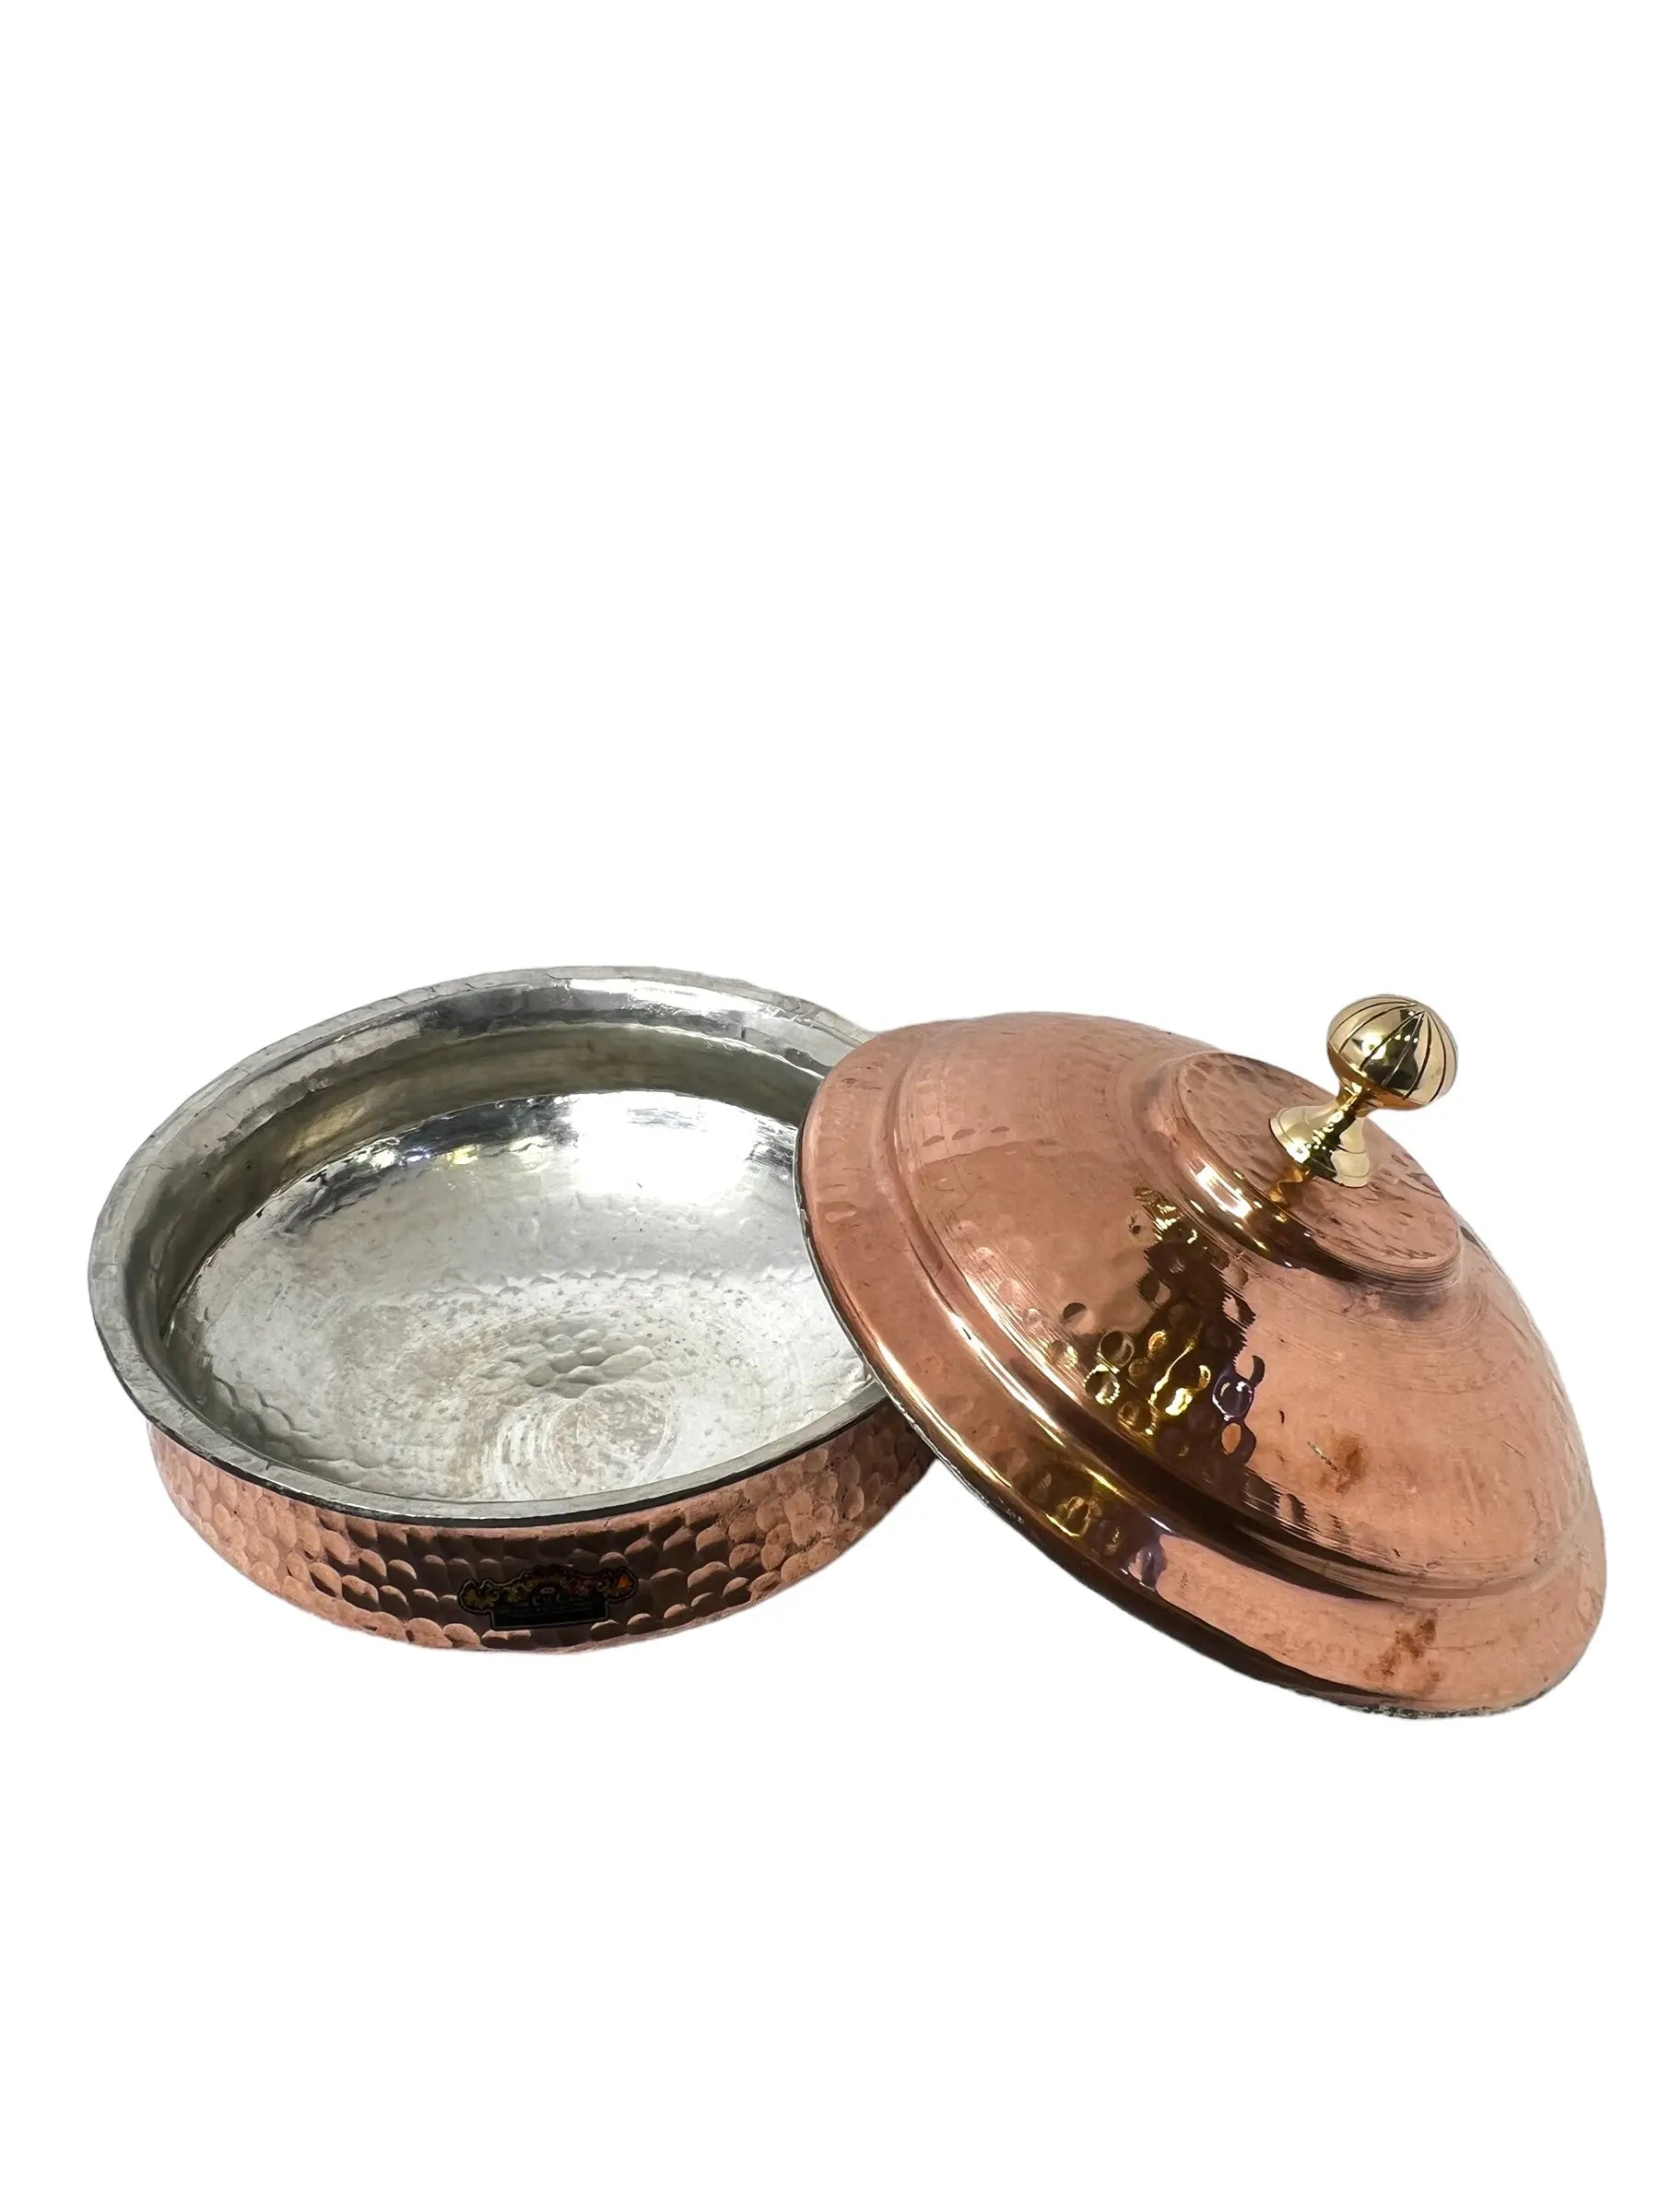 Pure Copper Handi Lagan With Copper Lid For Cooking - CROCKERY WALA AND COMPANY 